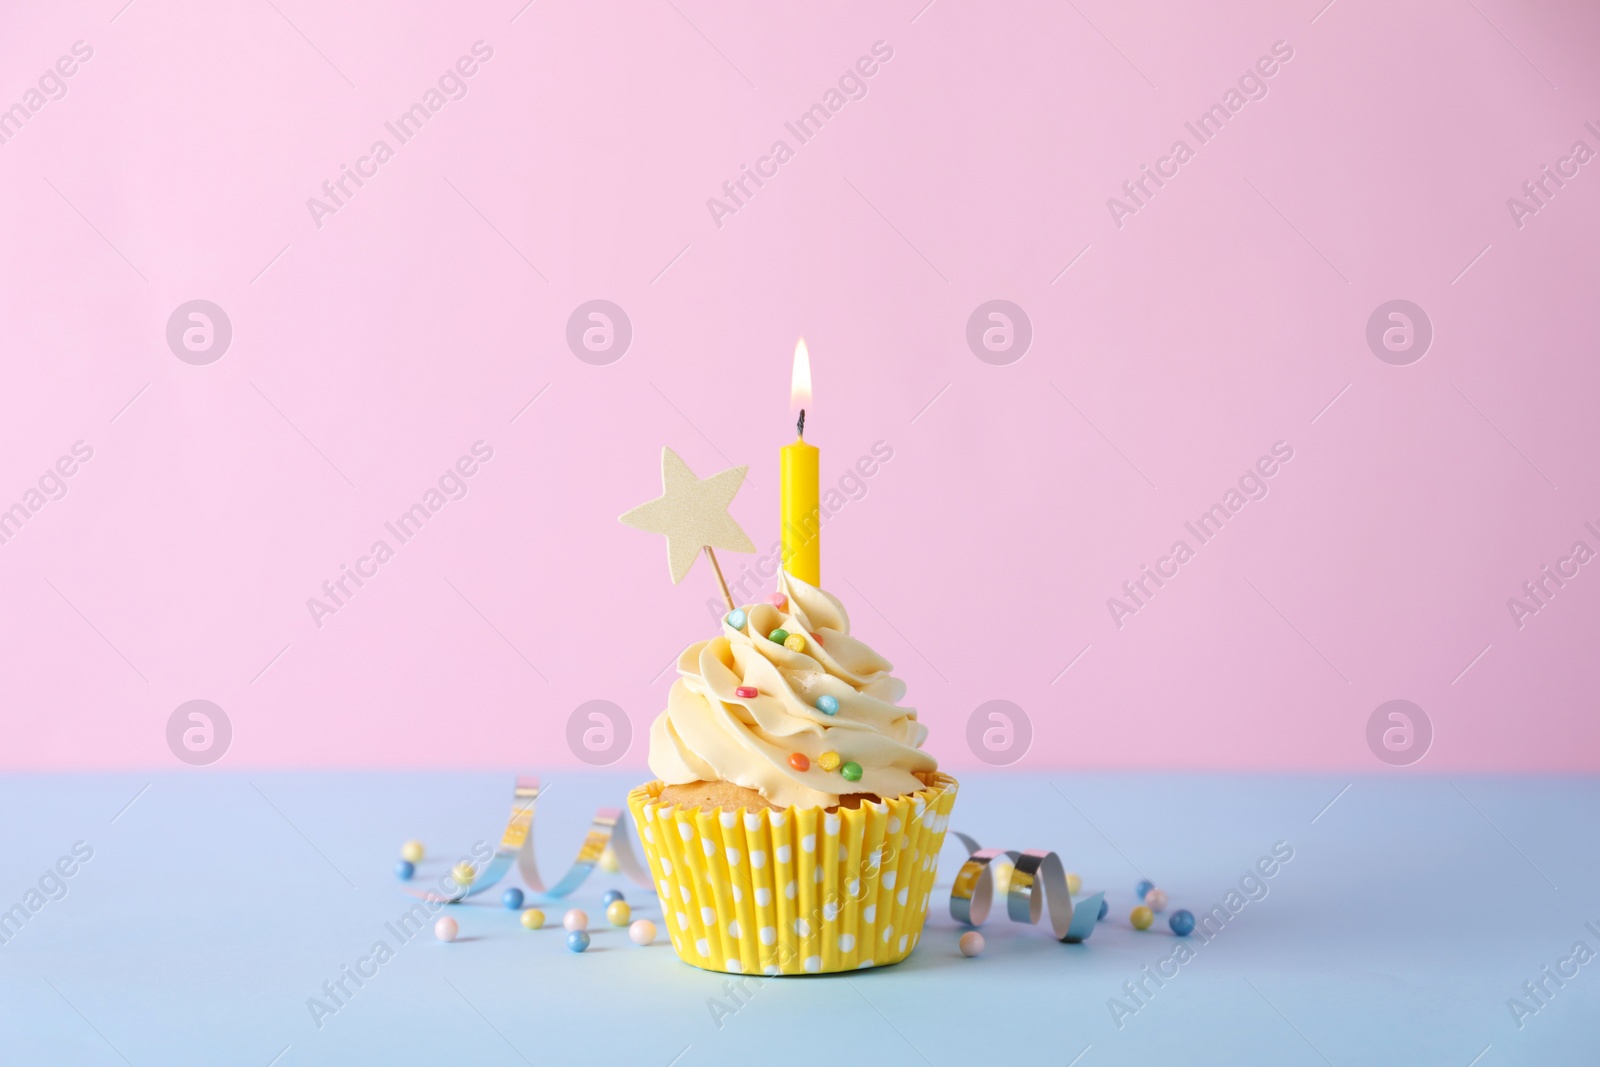 Photo of Delicious birthday cupcake with burning candle, sprinkles and streamer on light blue table against pink background